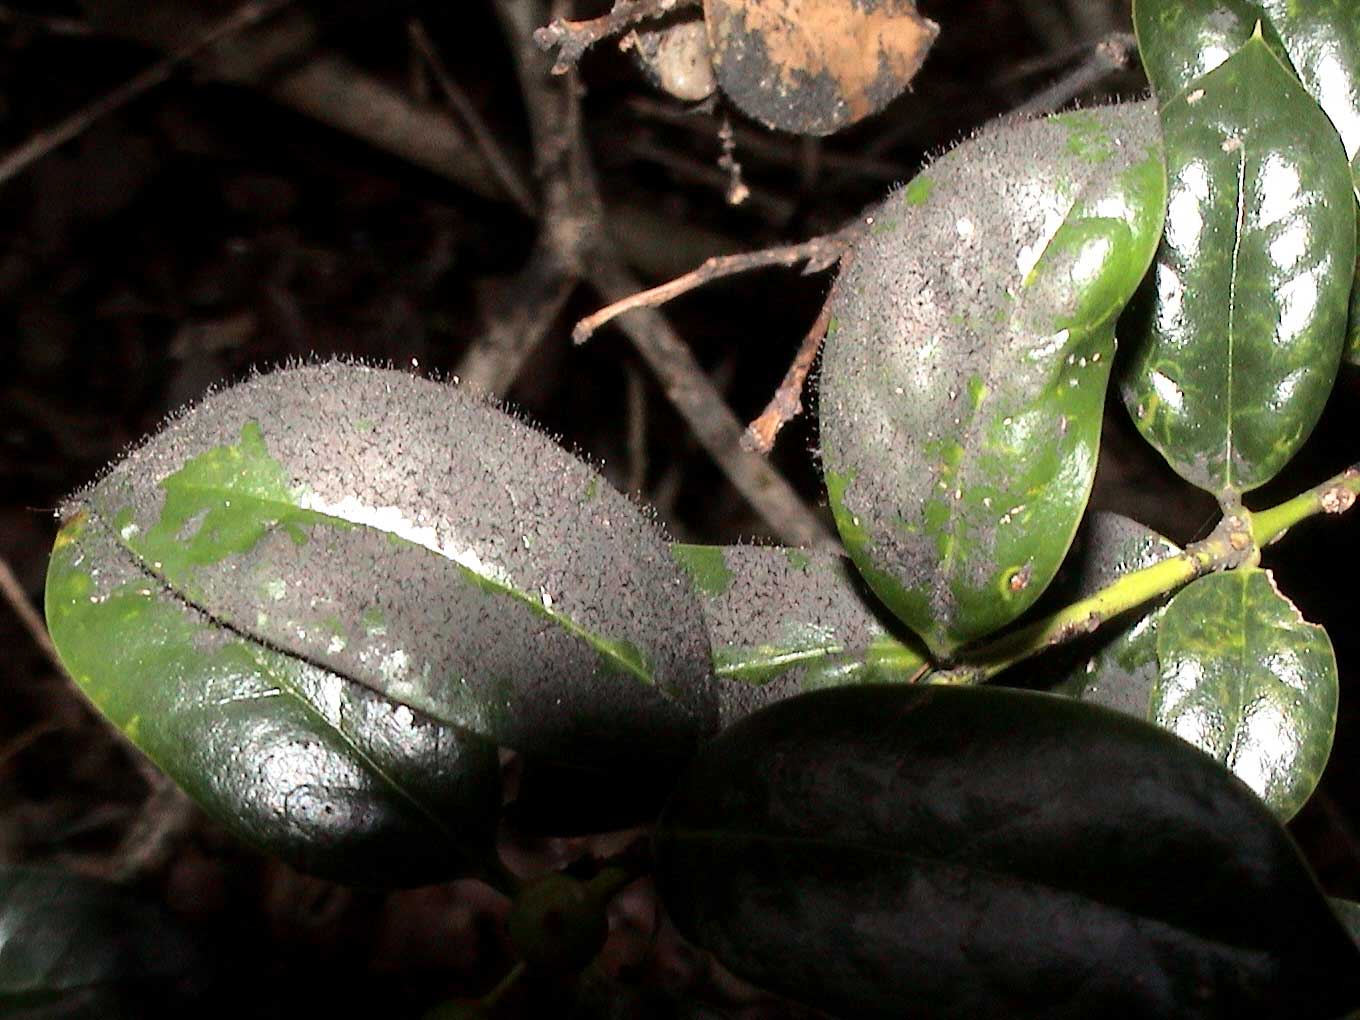 Figure 2. Vigorously growing sooty mold on holly. Note the sooty mold fungi are producing stalks (conidiophores) to launch their spores into the air.